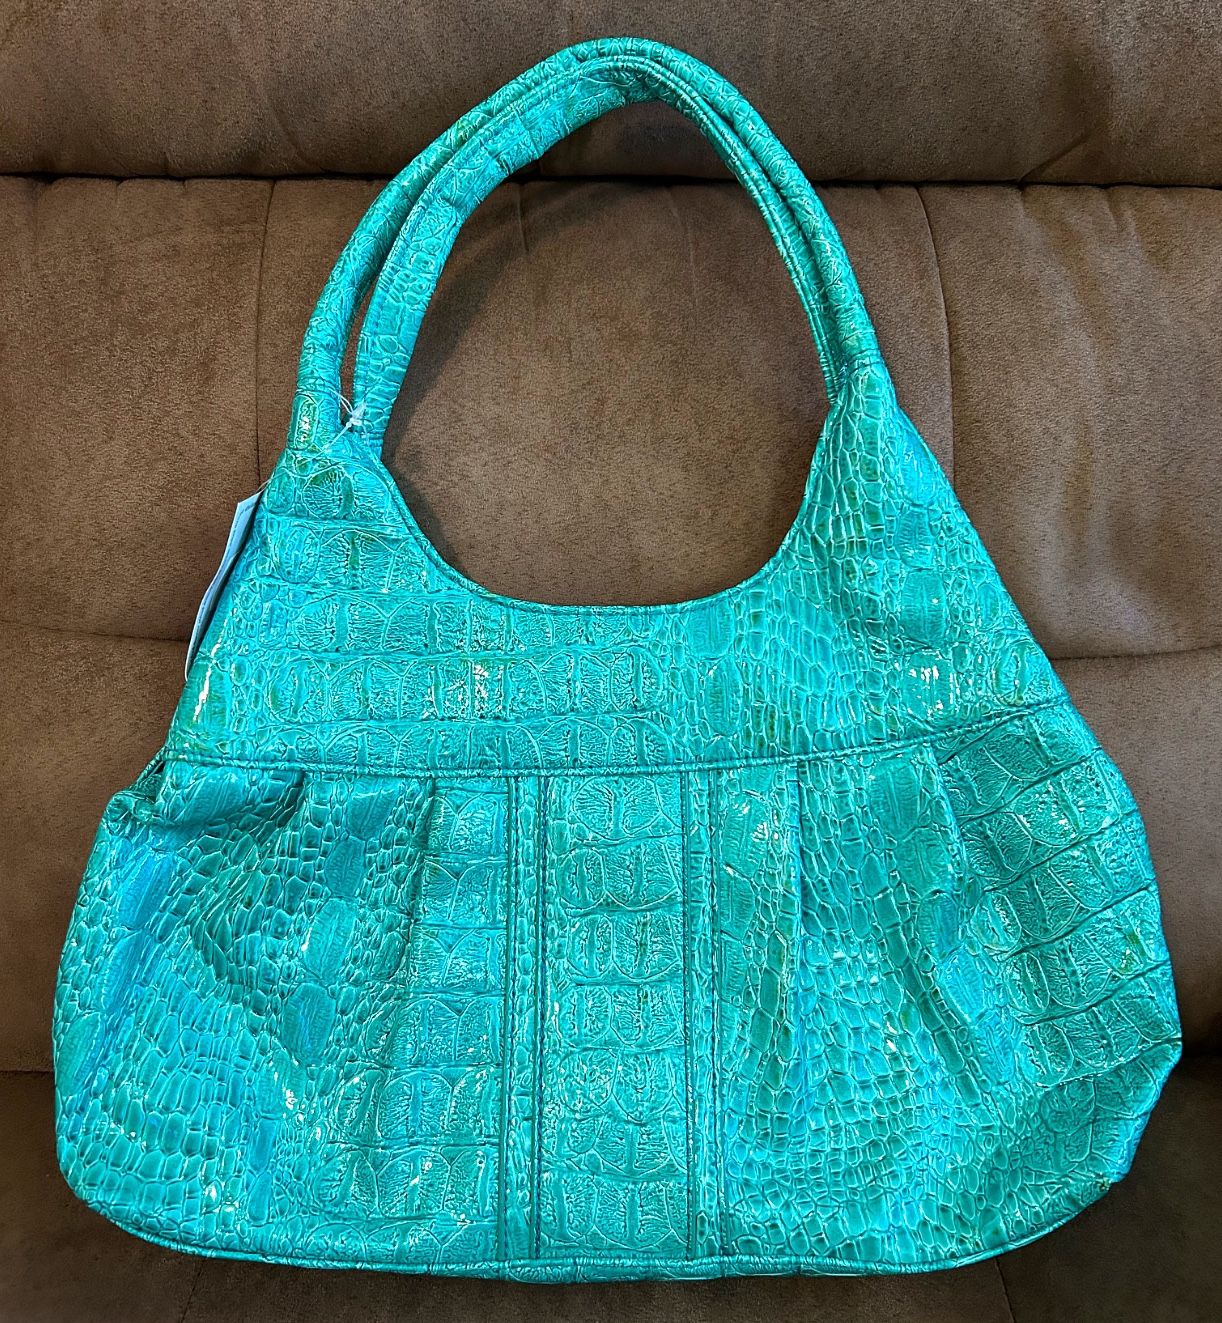 Alfred Dunner Brand Turquoise Colored Snakeskin Hobo Bag Style Purse 